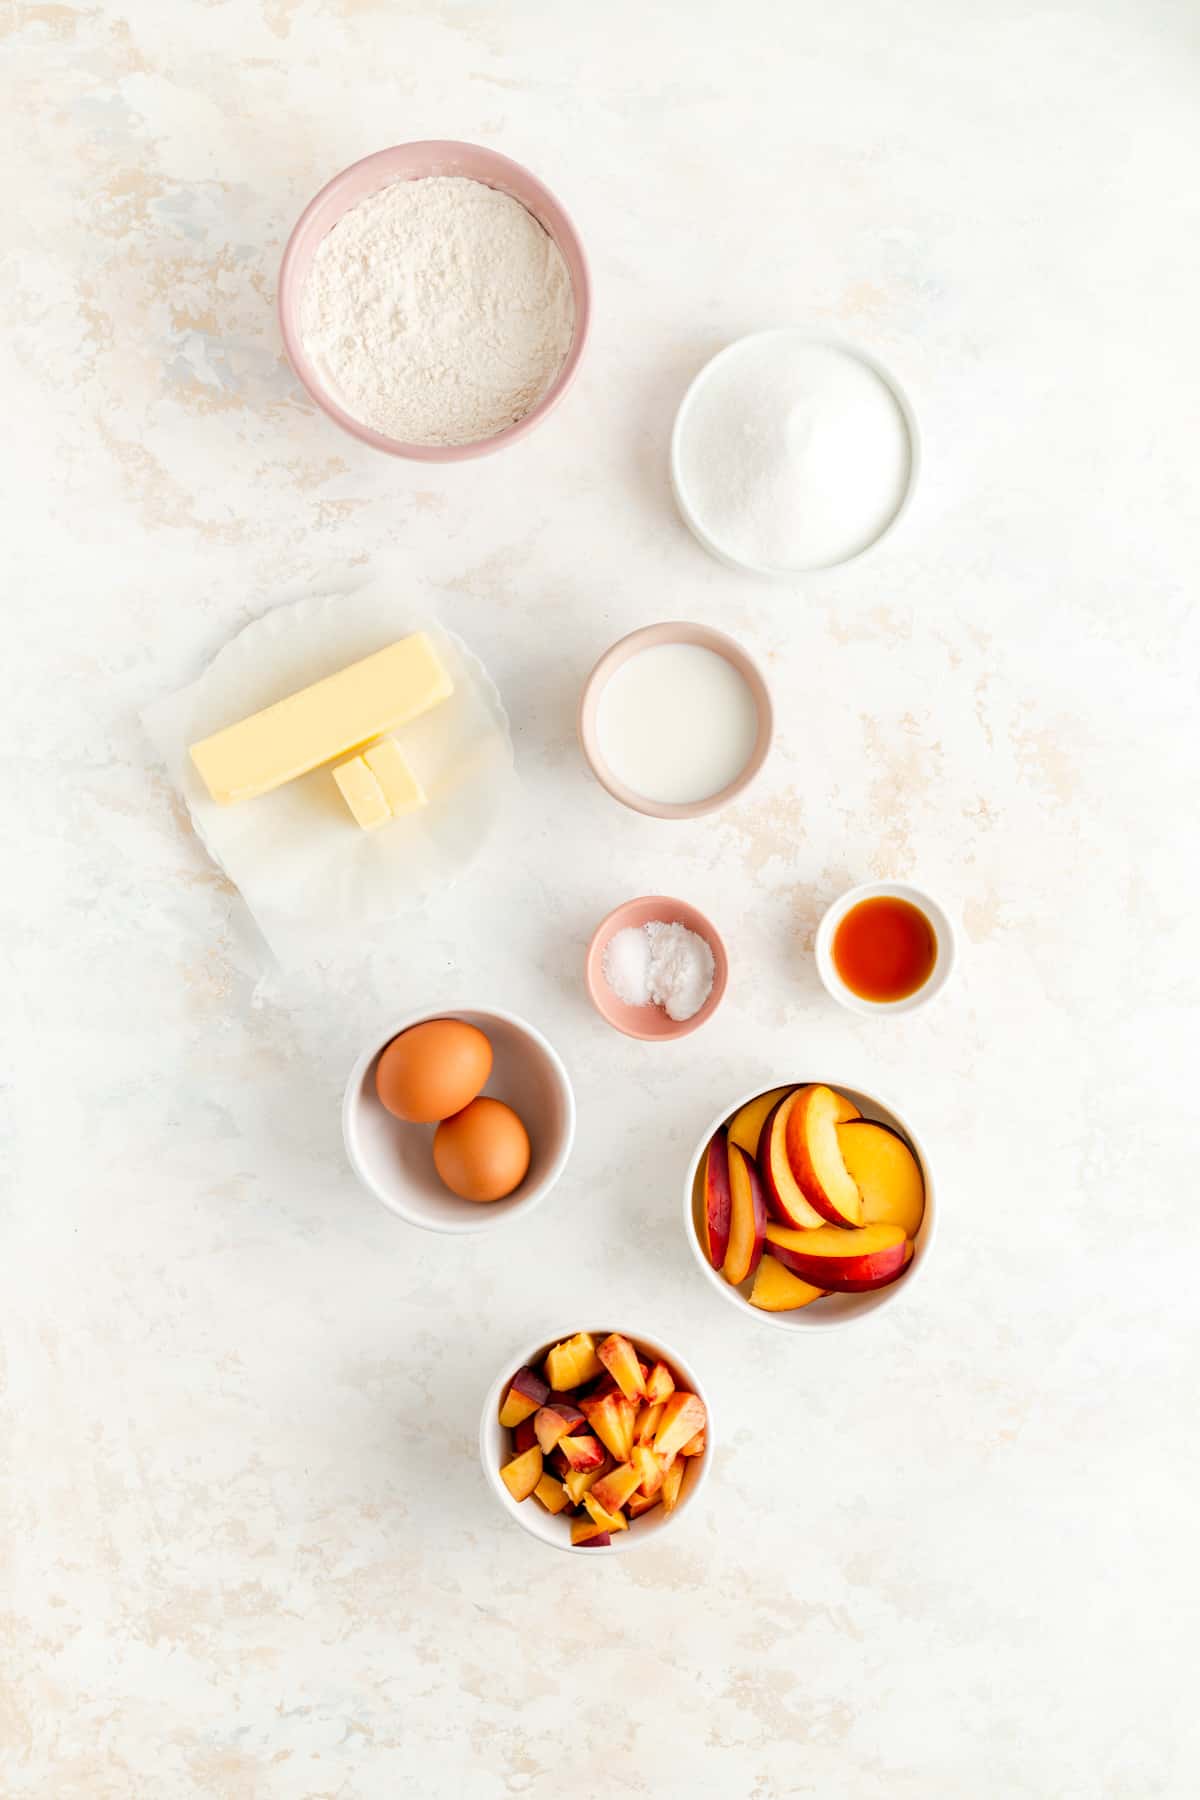 ingredients for peach pound cake in individual bowls on white background.